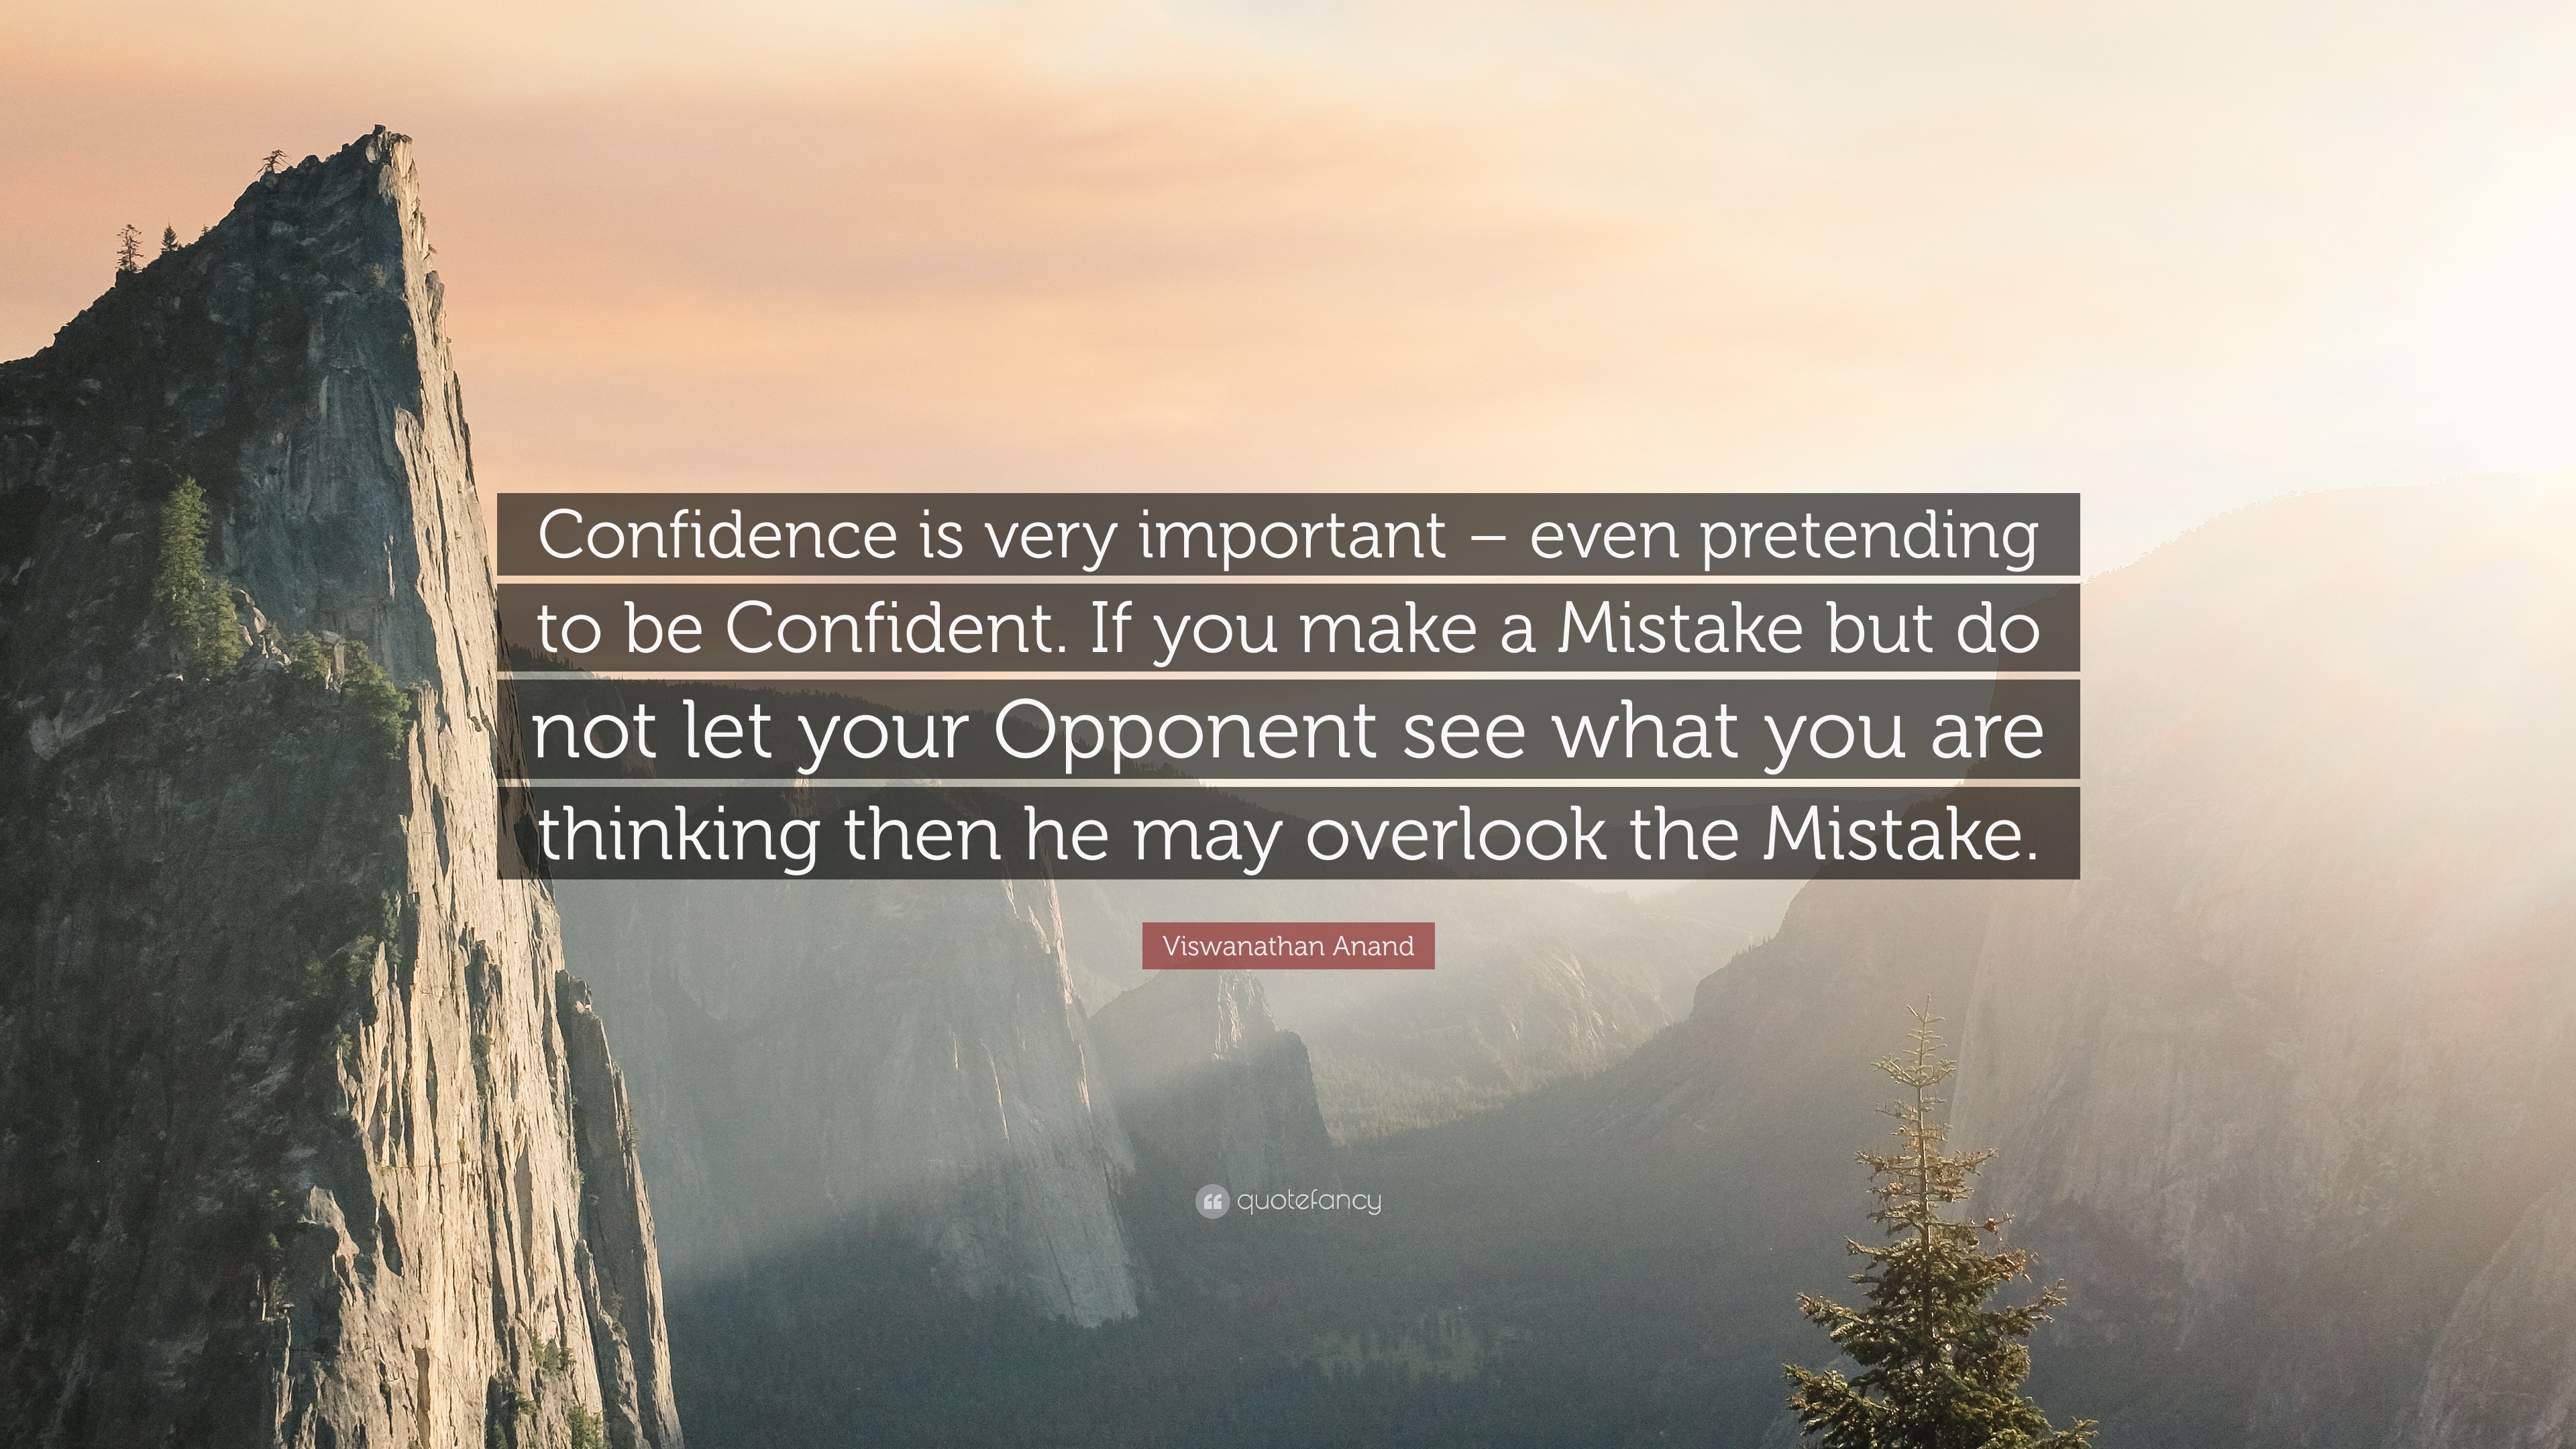 Viswanathan Anand - If revenge motivates you, go for it!